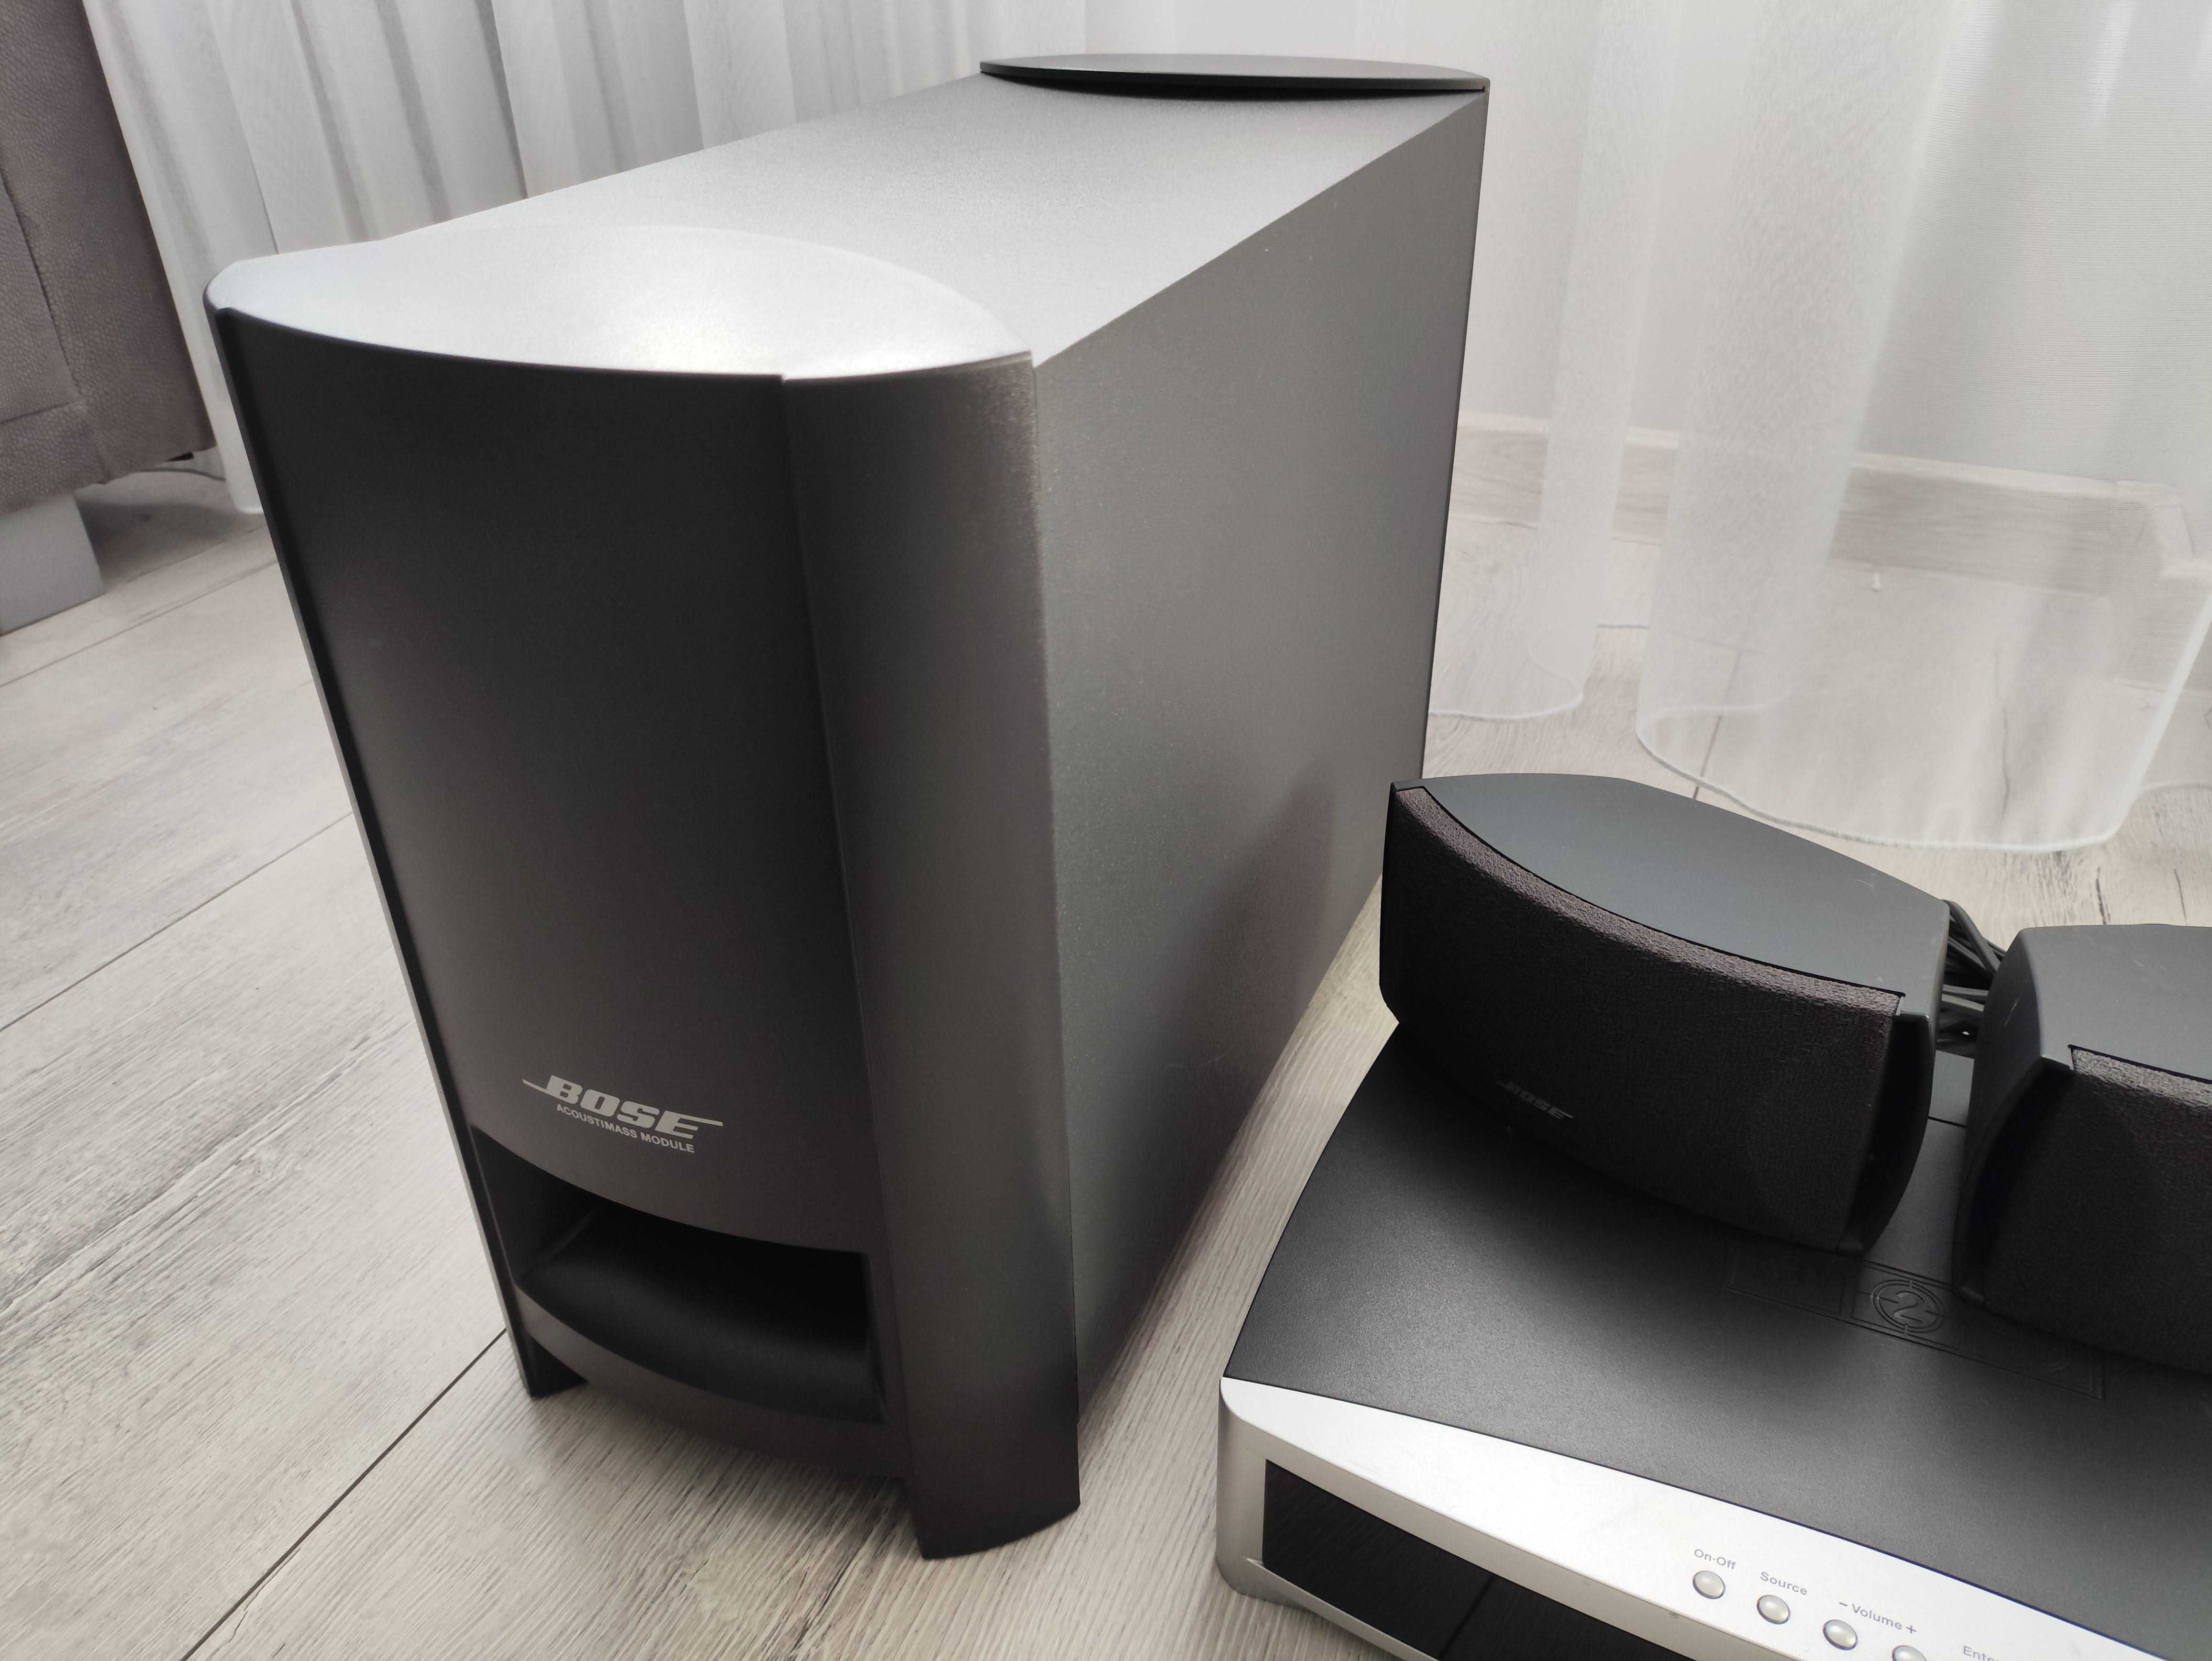 BOSE PS 3-2-1 II Powered Speaker System